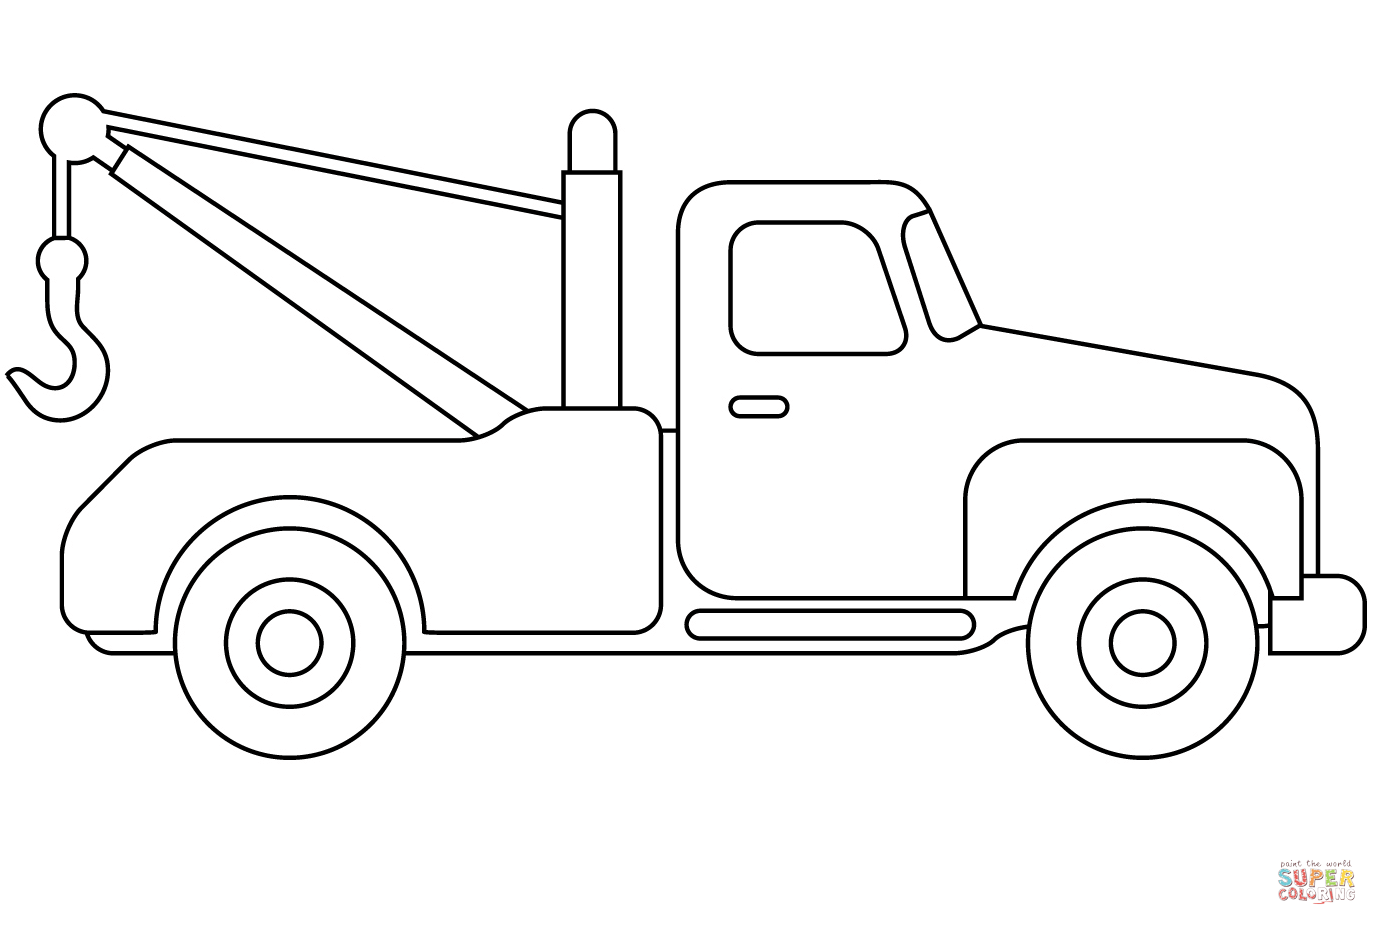 Tow truck coloring page free printable coloring pages